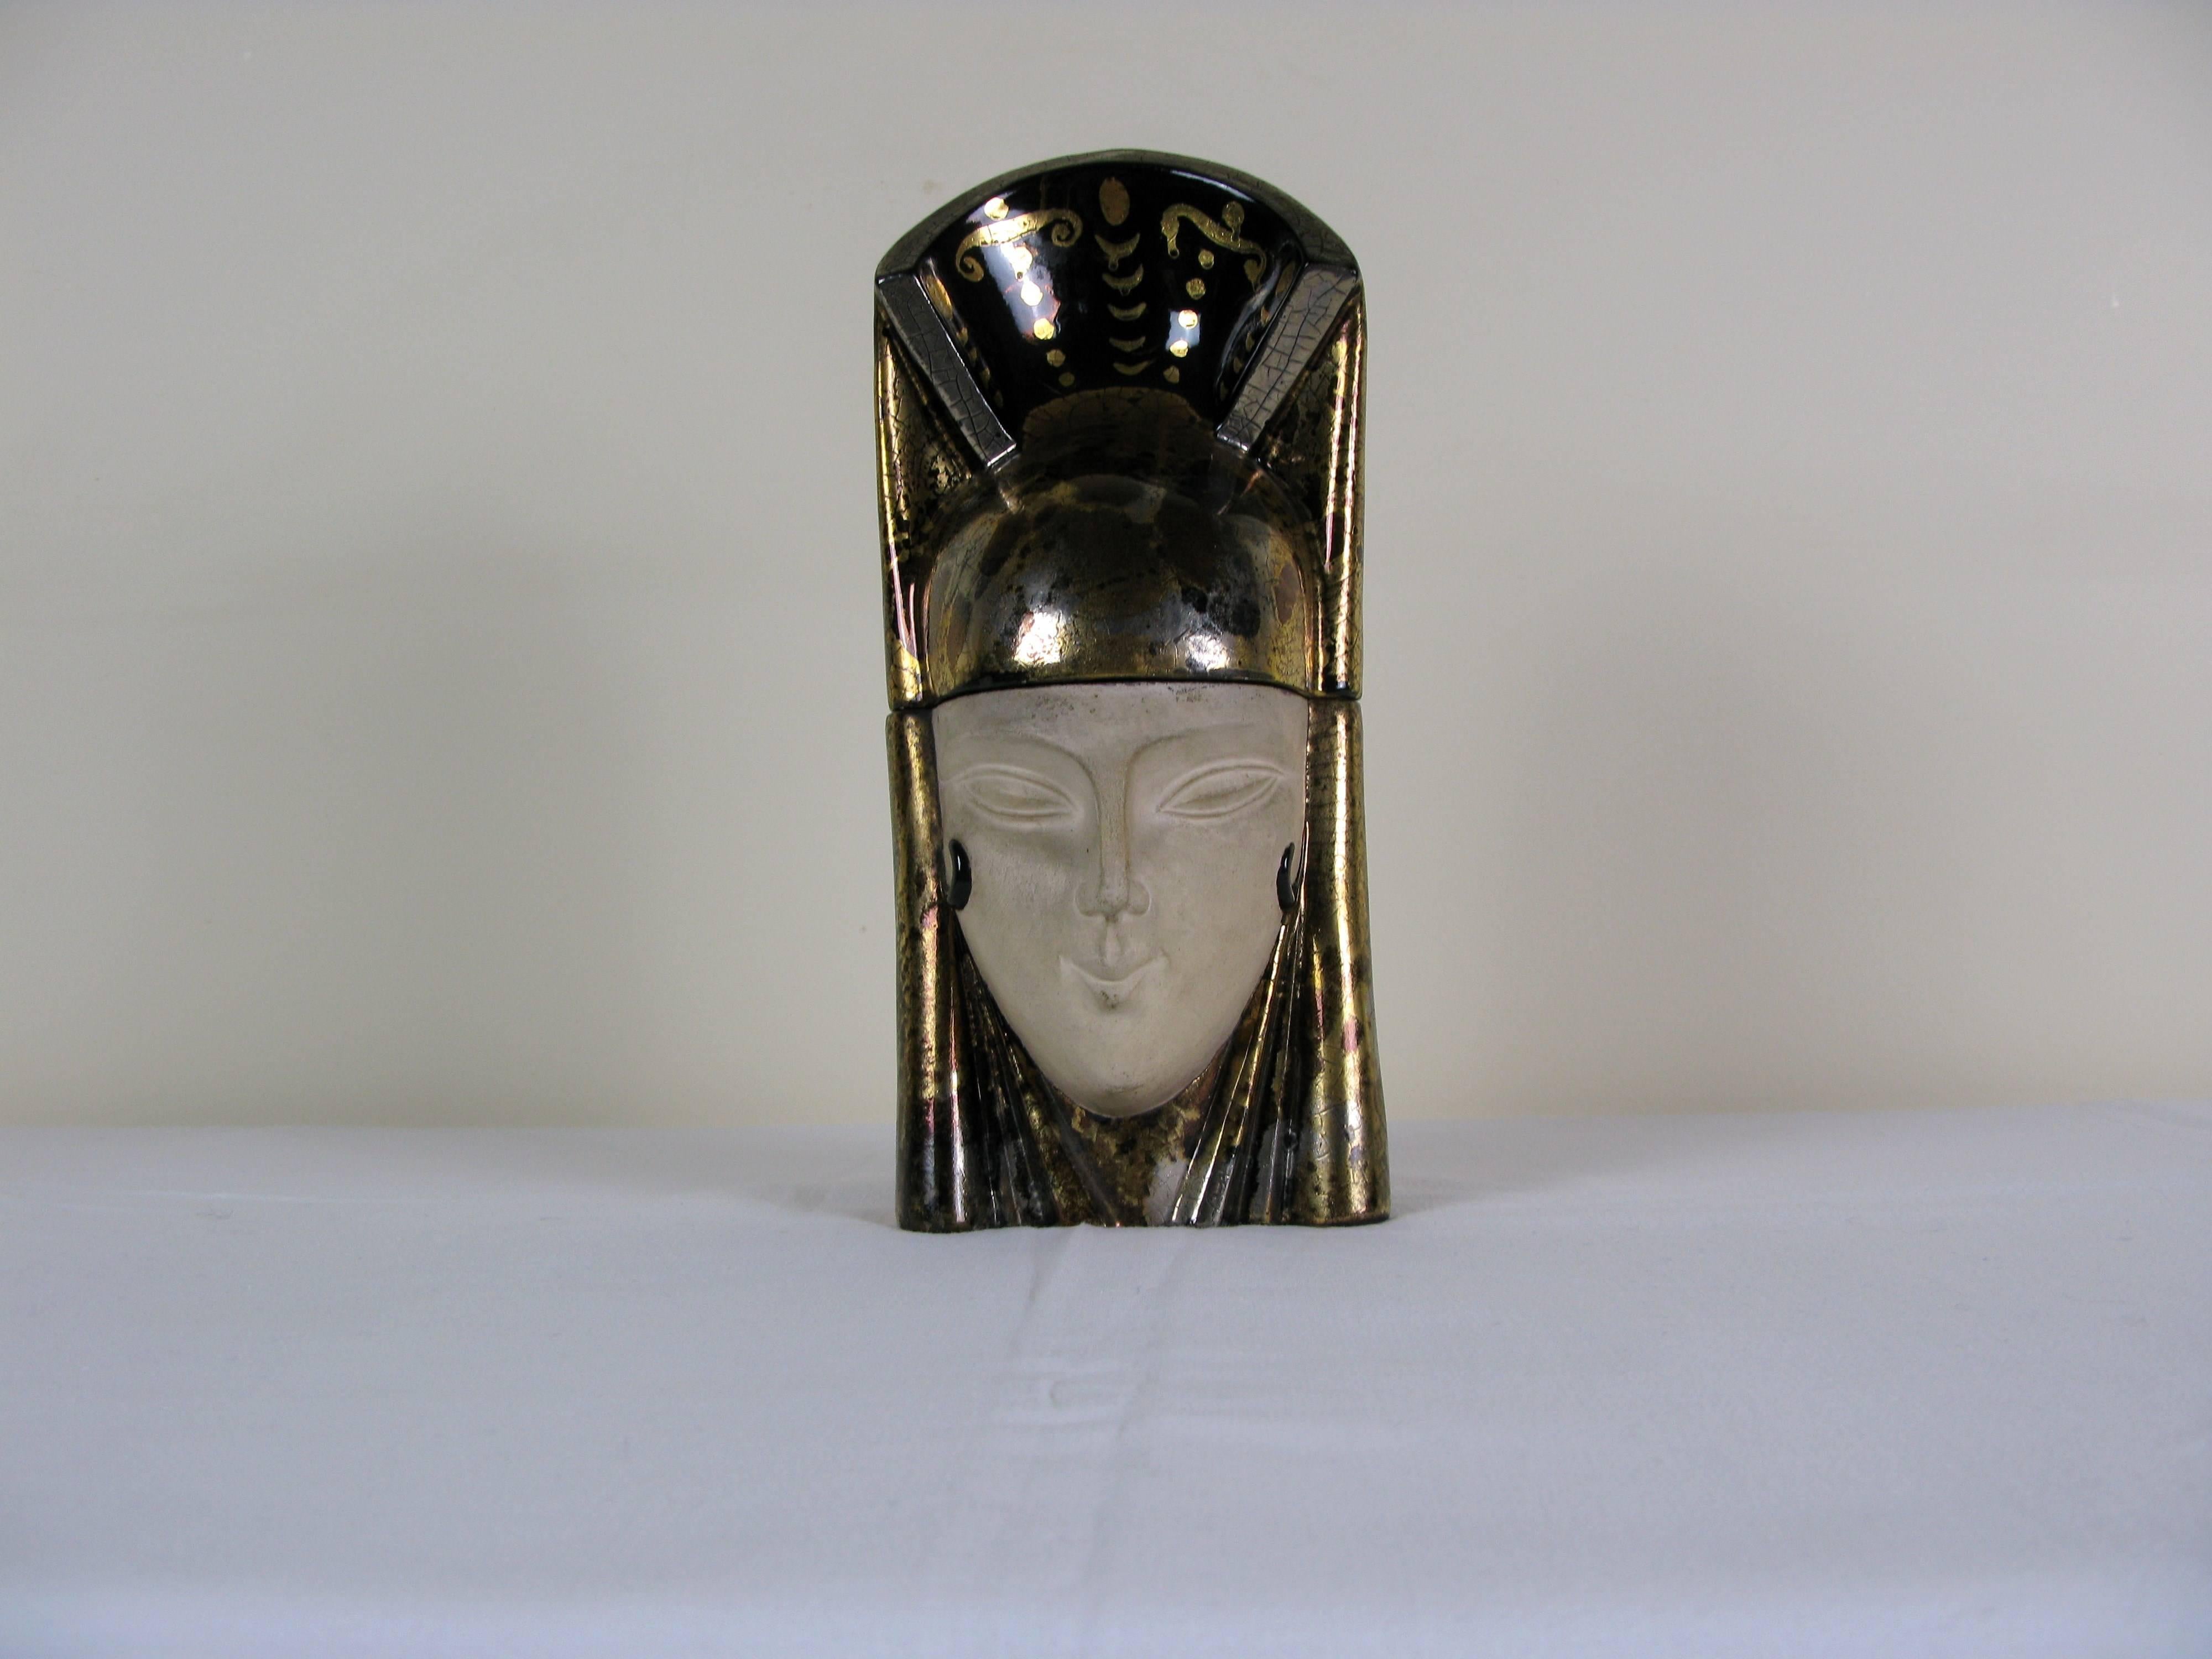 Gold leaf candy box representing an Egyptian head in enameled earthenware.
French Art Deco work by ROBJ.
Signed and numbered (6 on 9) under the base.
Perfect original condition.